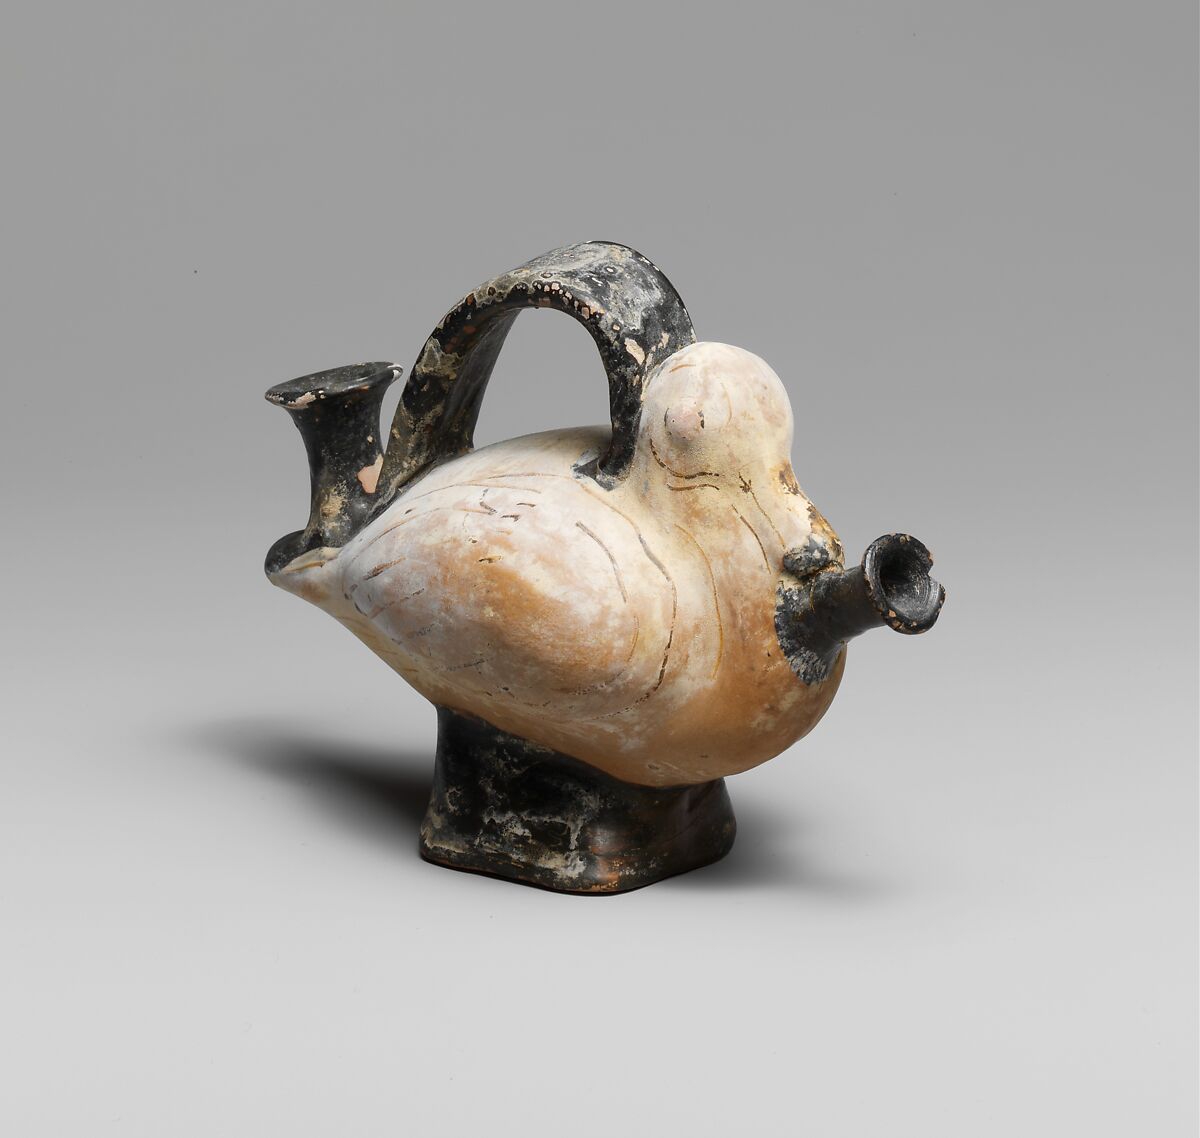 Terracotta askos (flask with a spout and handle over the top) in the form of a duck, Terracotta, Greek, Attic 